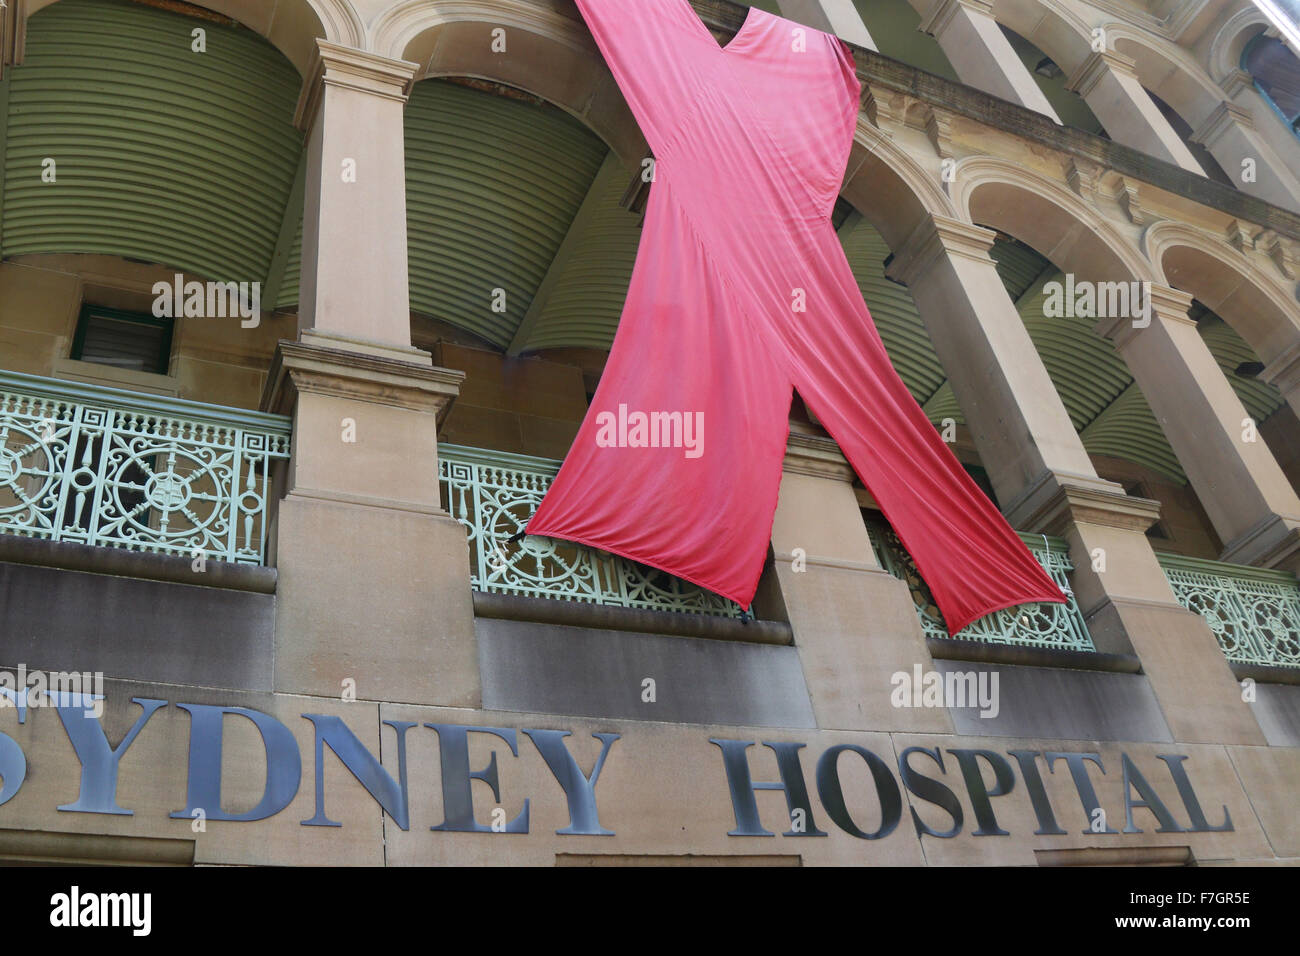 Sydney, Australia. 1 December 2015. The Sydney Hospital on Macquarie Street has a giant red ribbon for World AIDS Day. World AIDS Day raises awareness around the world about the issues surrounding HIV and AIDS. It is a day for people to show their support for people living with HIV and to commemorate people who have died. Copyright Credit:  2015 Richard Milnes/Alamy Live News. Stock Photo